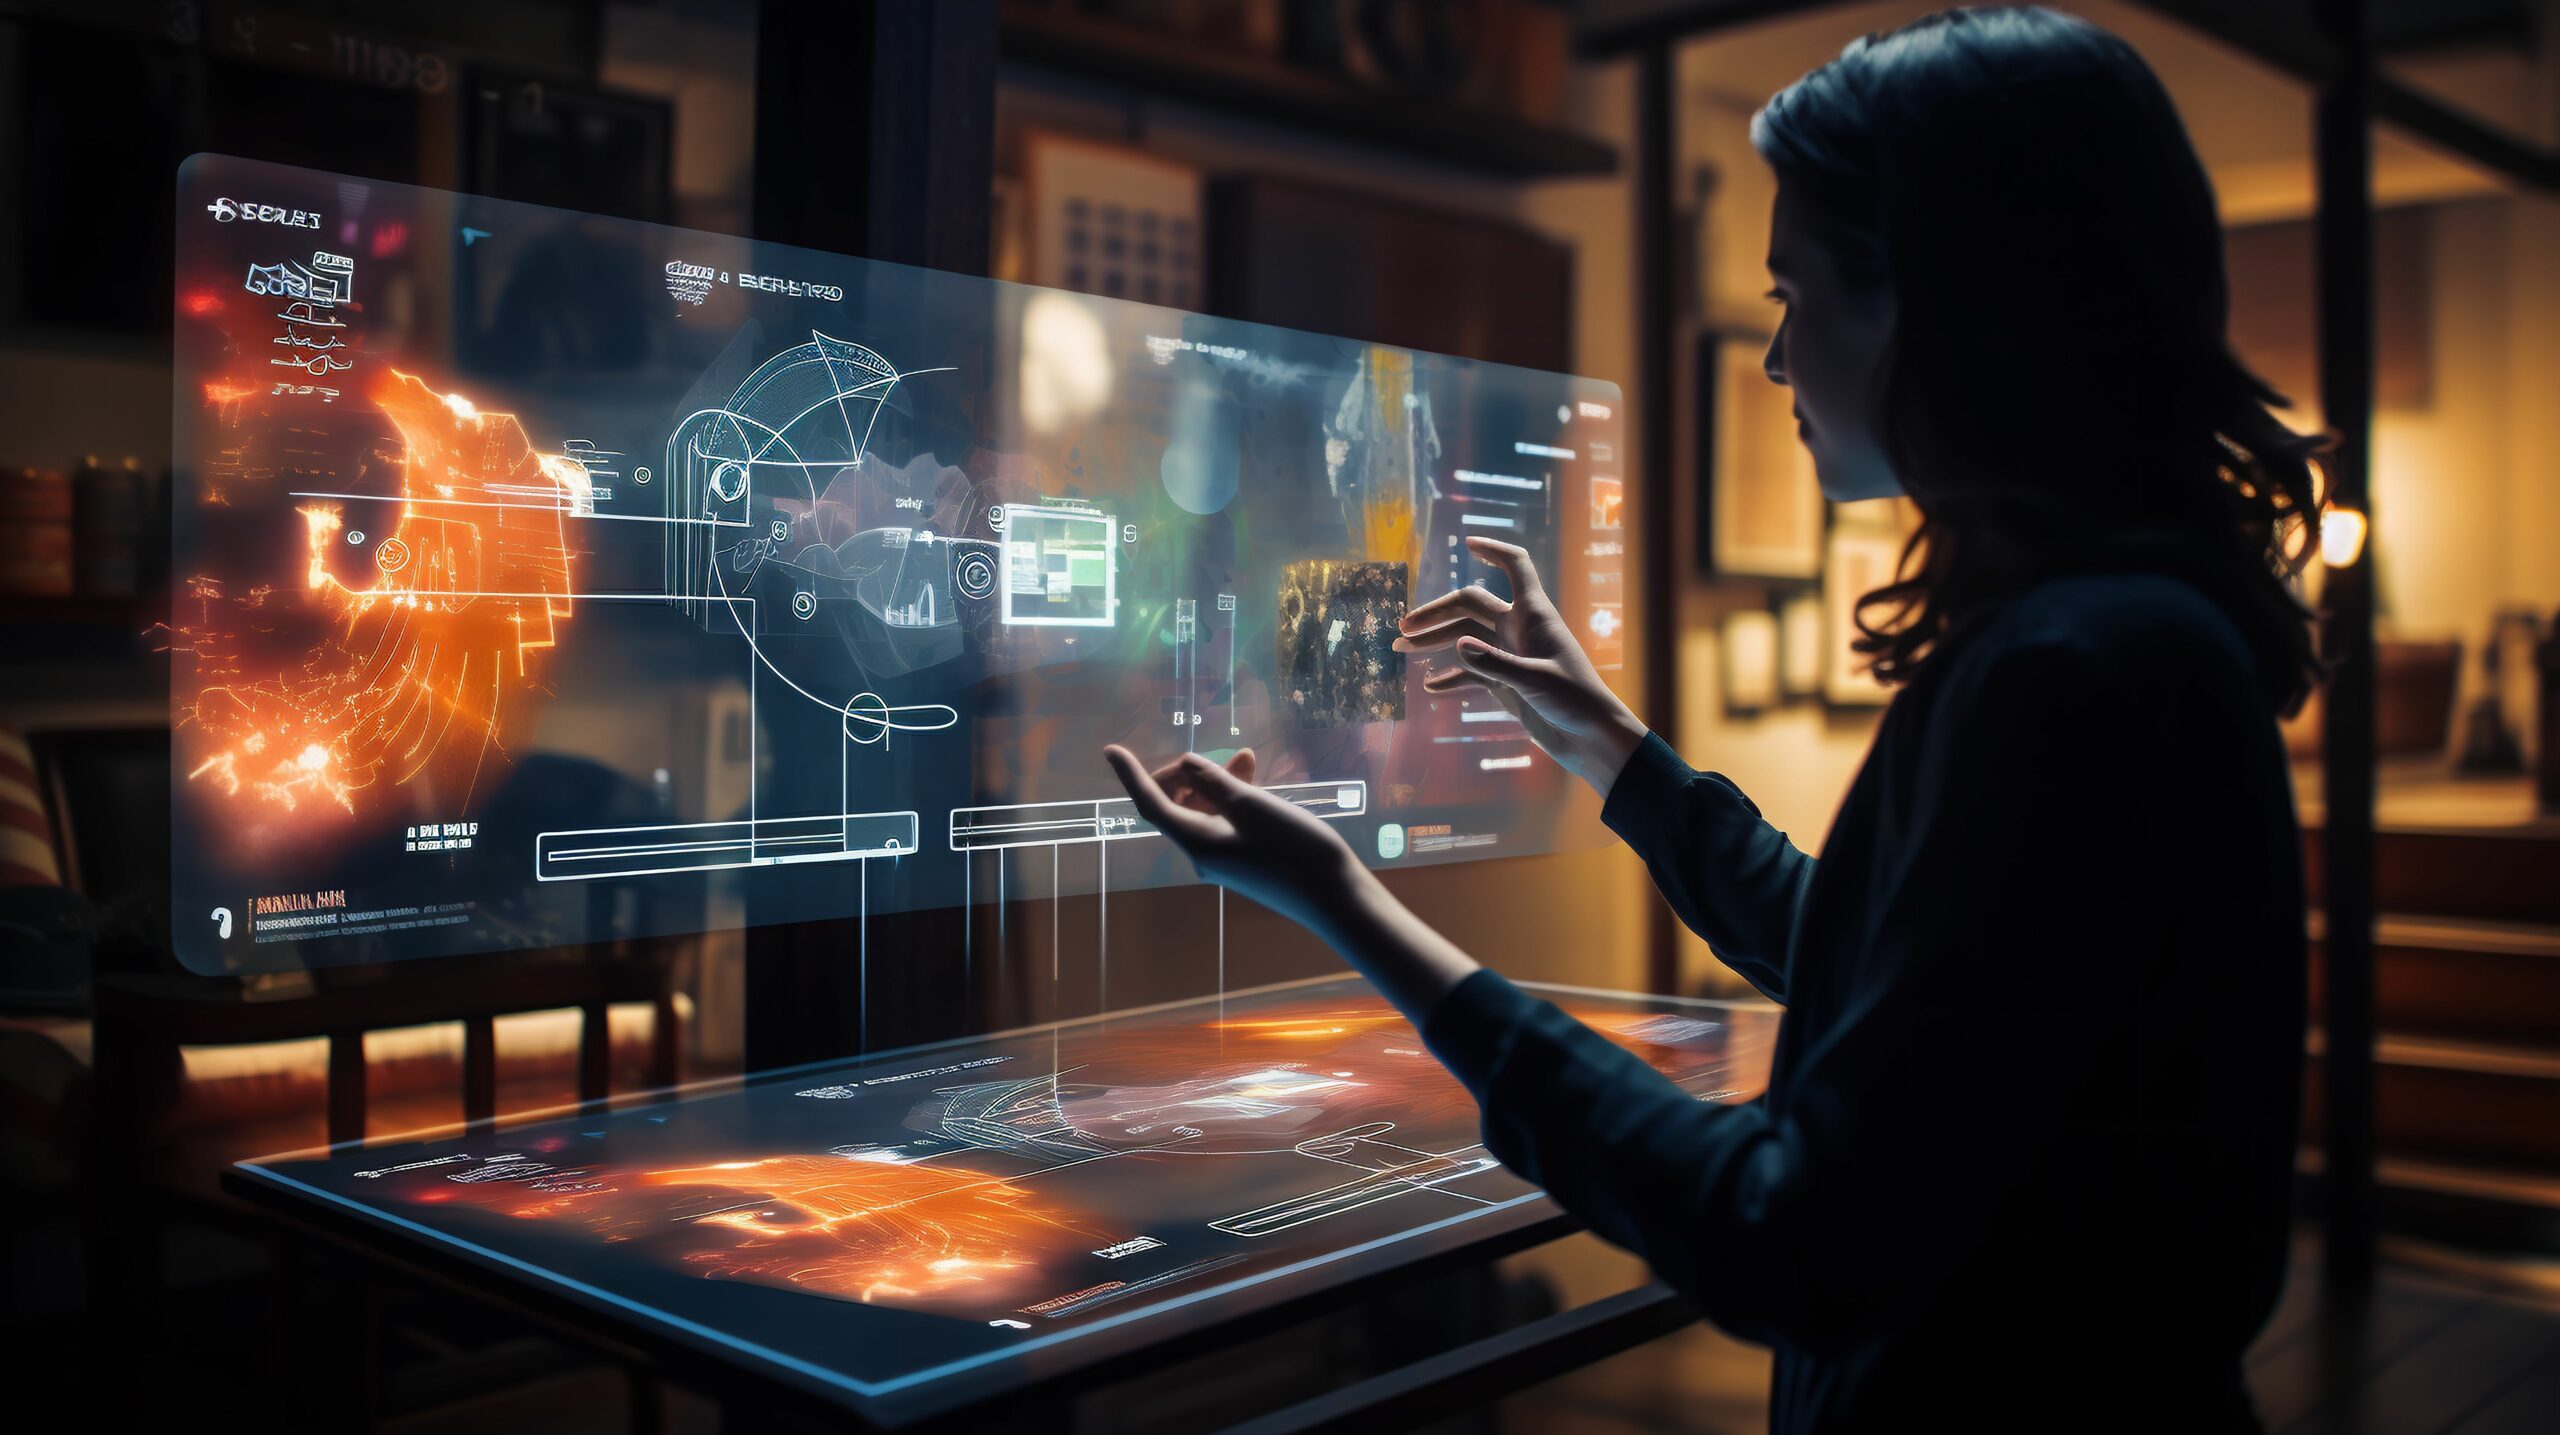 A female solutions architect looks straight ahead as a reflection of a computer screen demonstrates her consideration of cyber solutions.